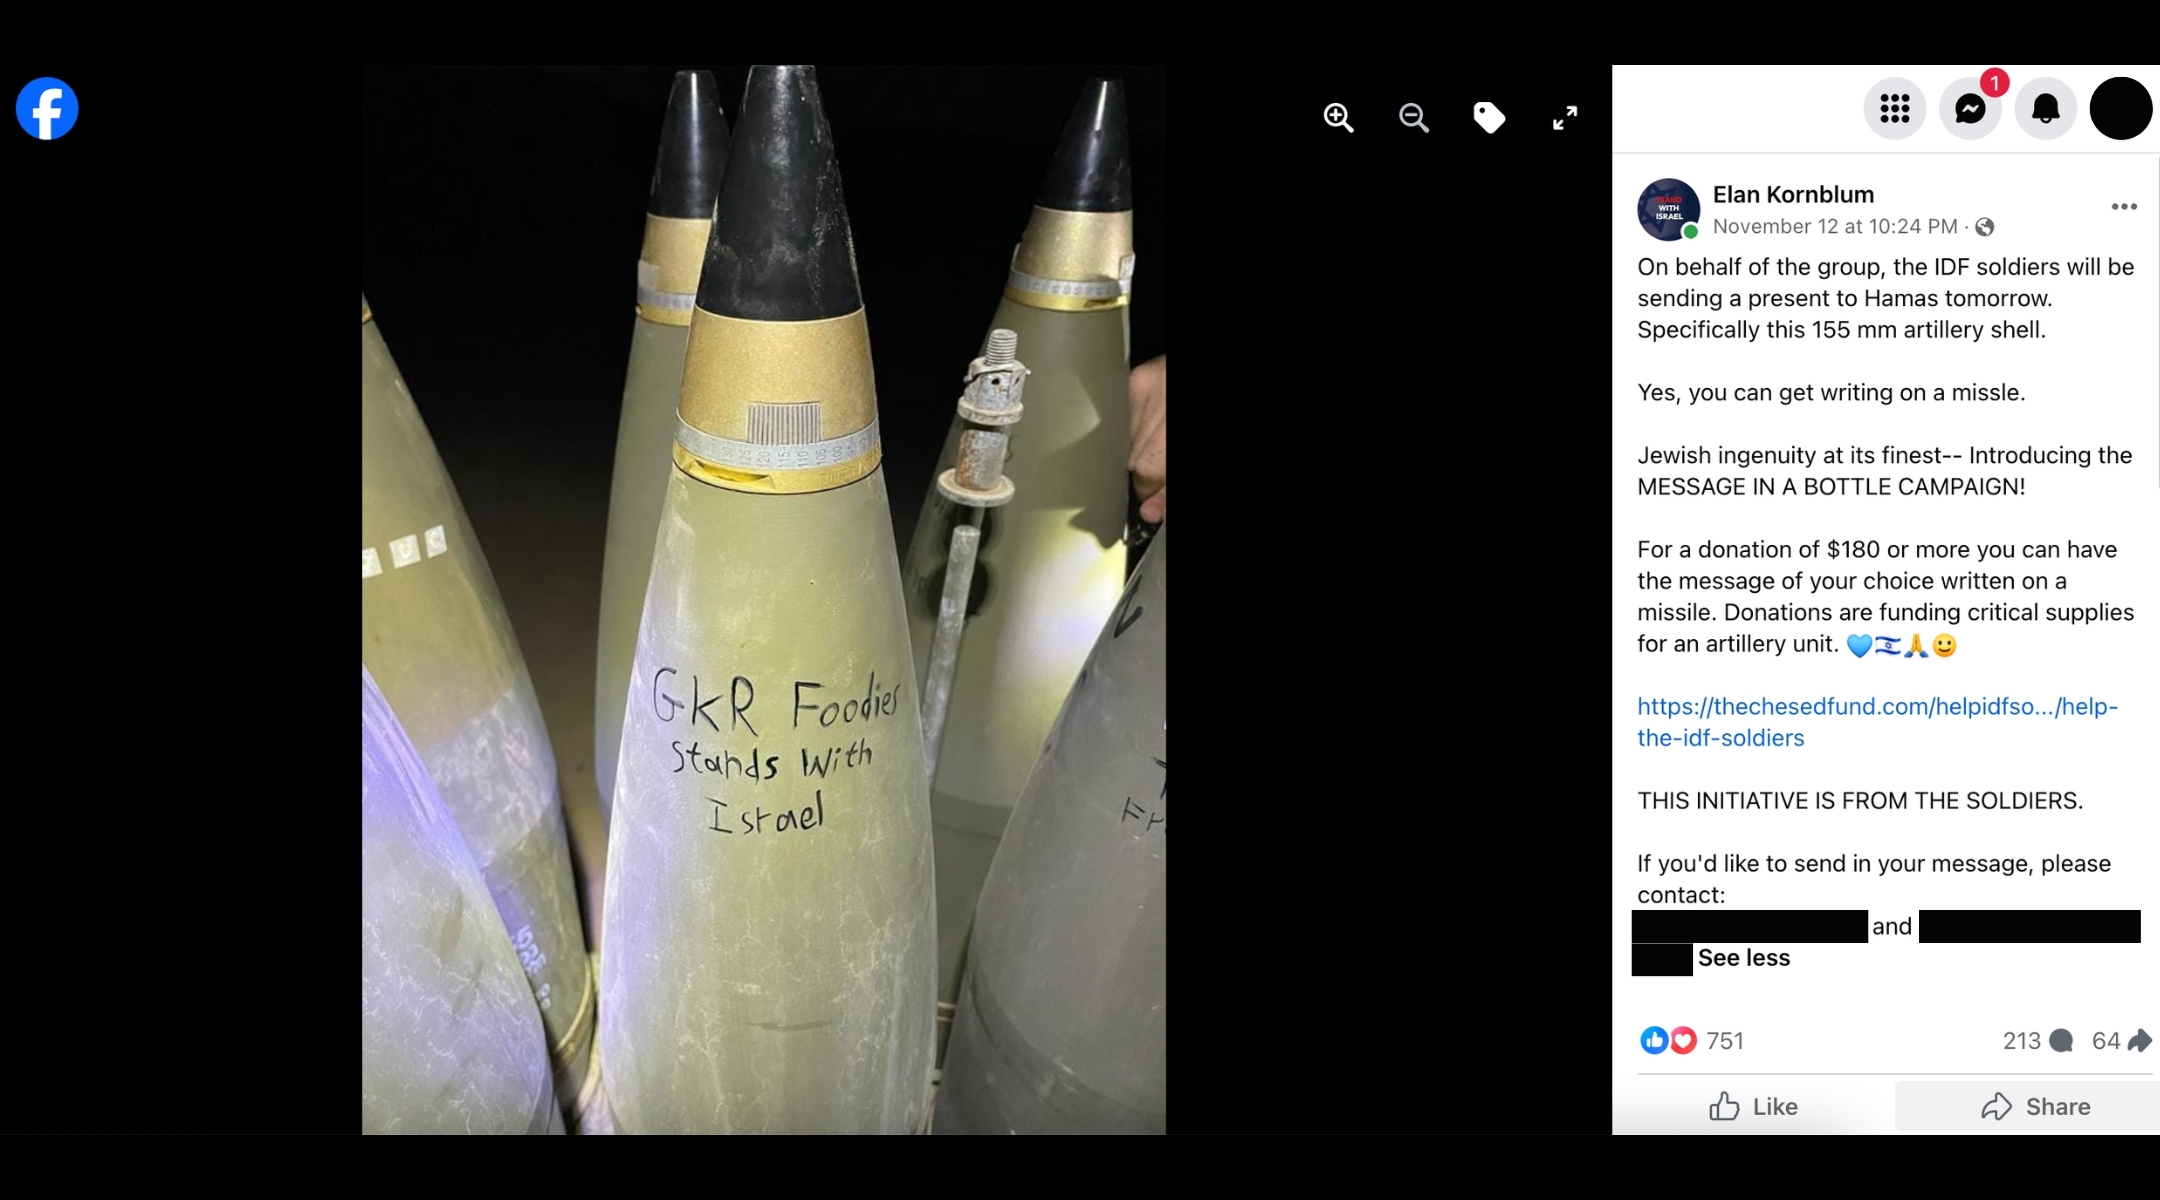 A popular kosher food Facebook group became the latest battle scene for wartime ethics questions after a divisive post about missile messages tore the group apart for two days. (Screenshot via Facebook)